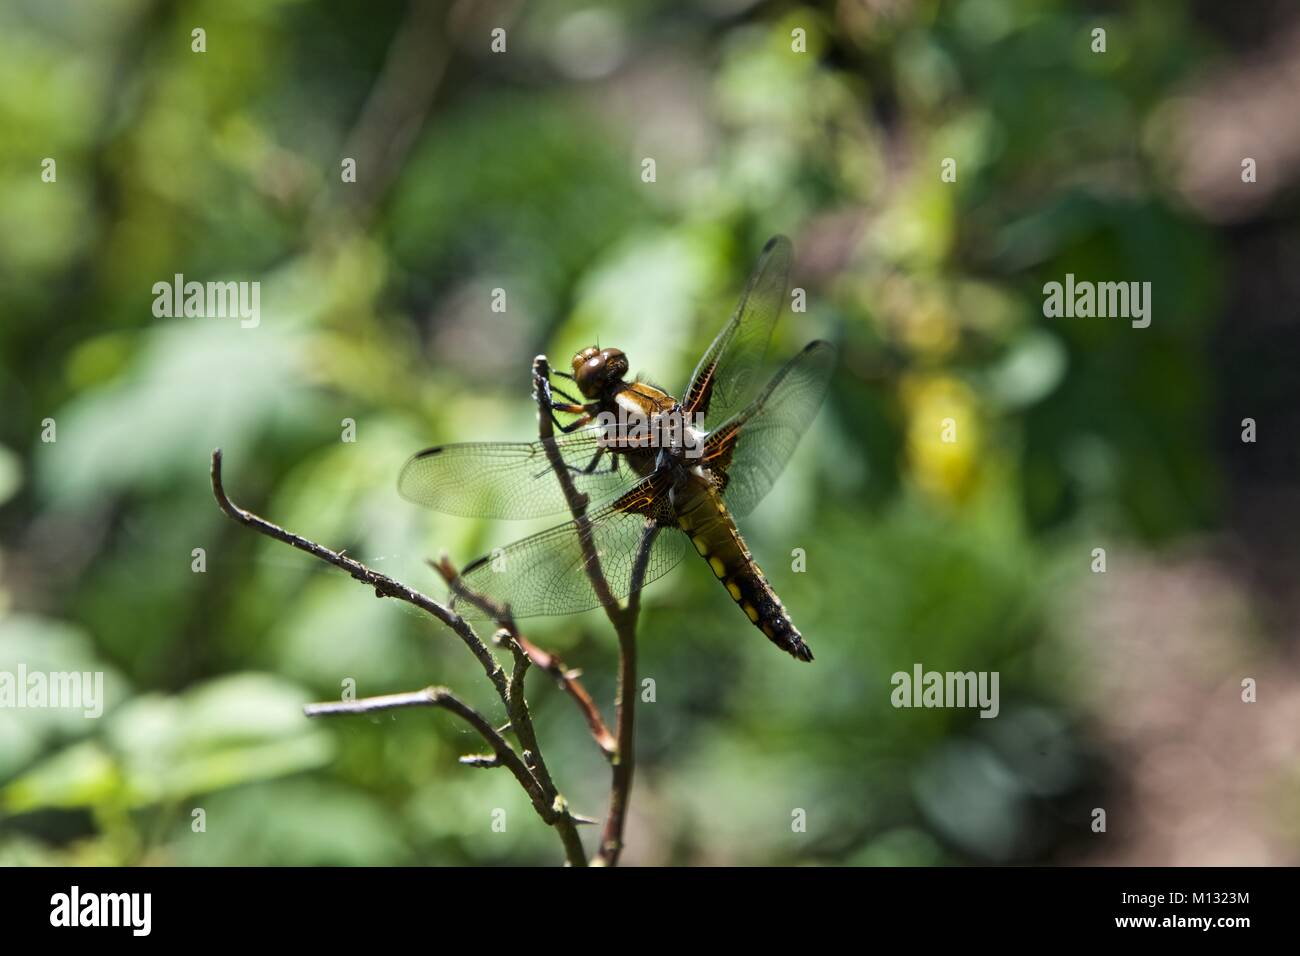 Dragonfly on a stick in a garden Stock Photo